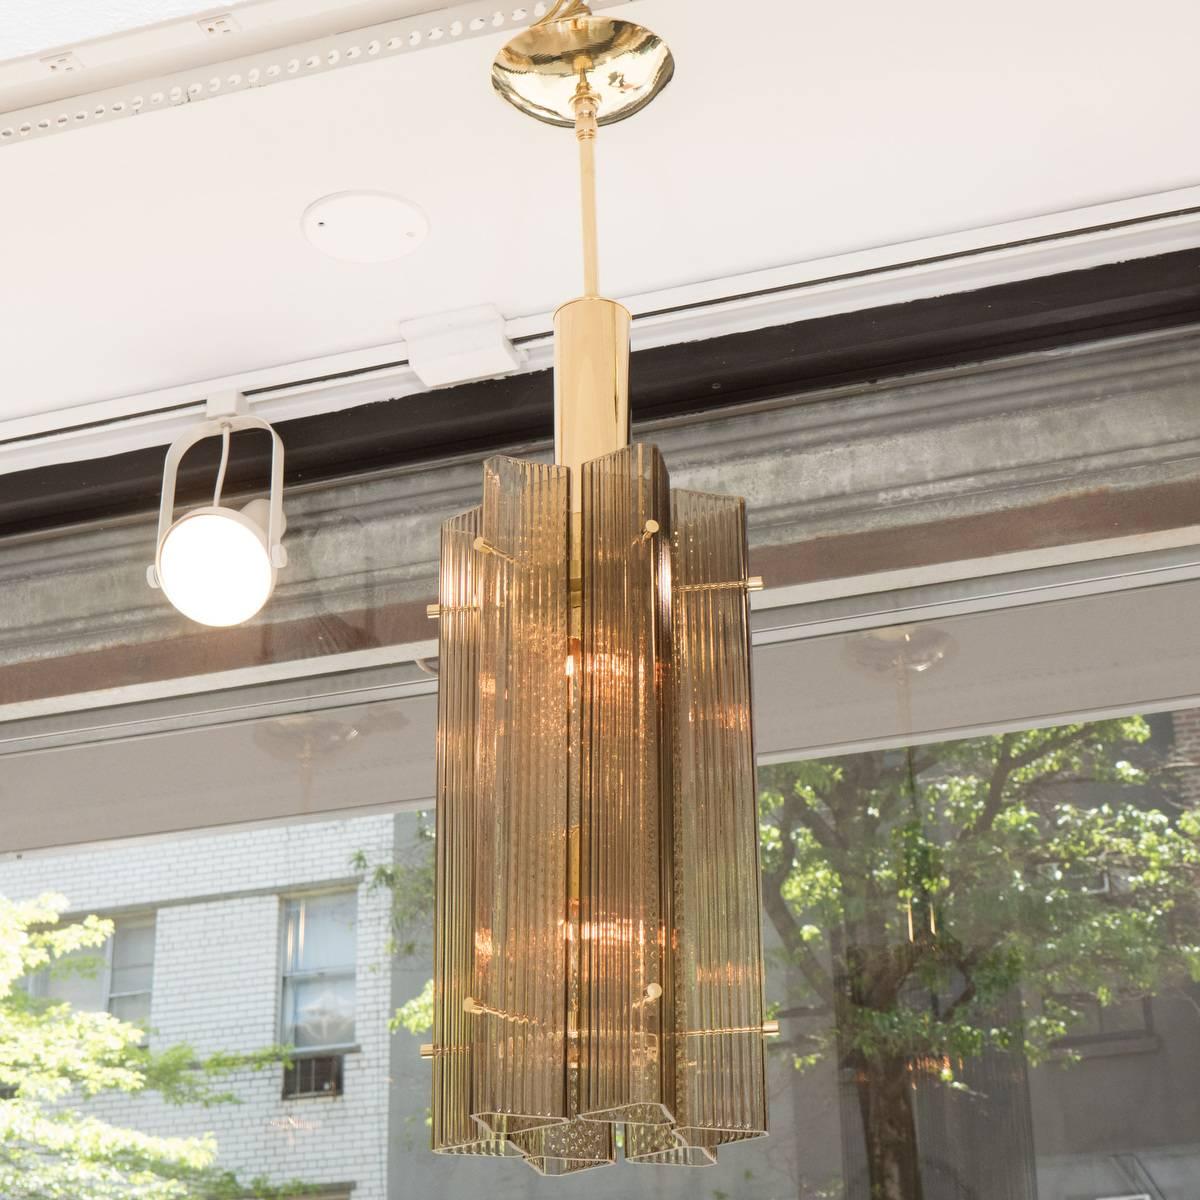 Brass pendant ceiling fixtures composed of clustered smoked and fluted glass tube elements.